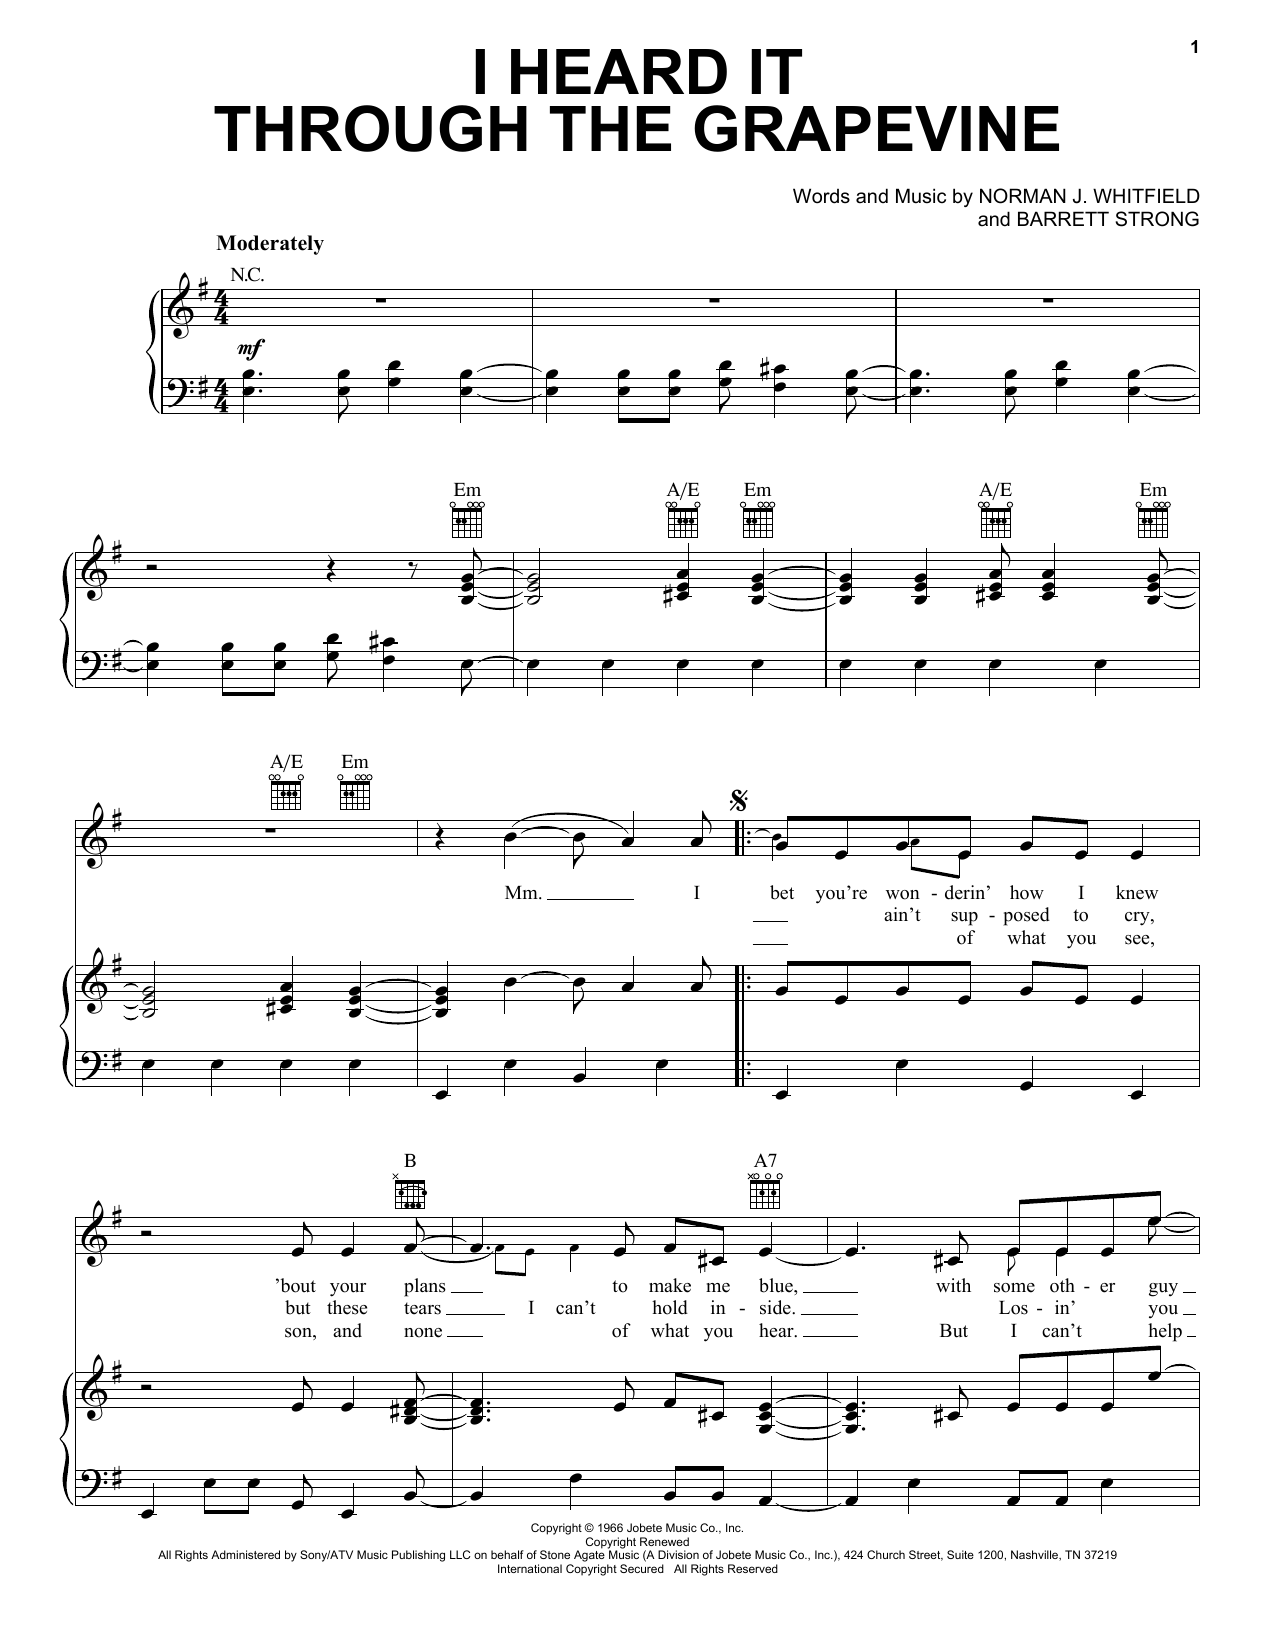 Marvin Gaye I Heard It Through The Grapevine sheet music notes and chords. Download Printable PDF.